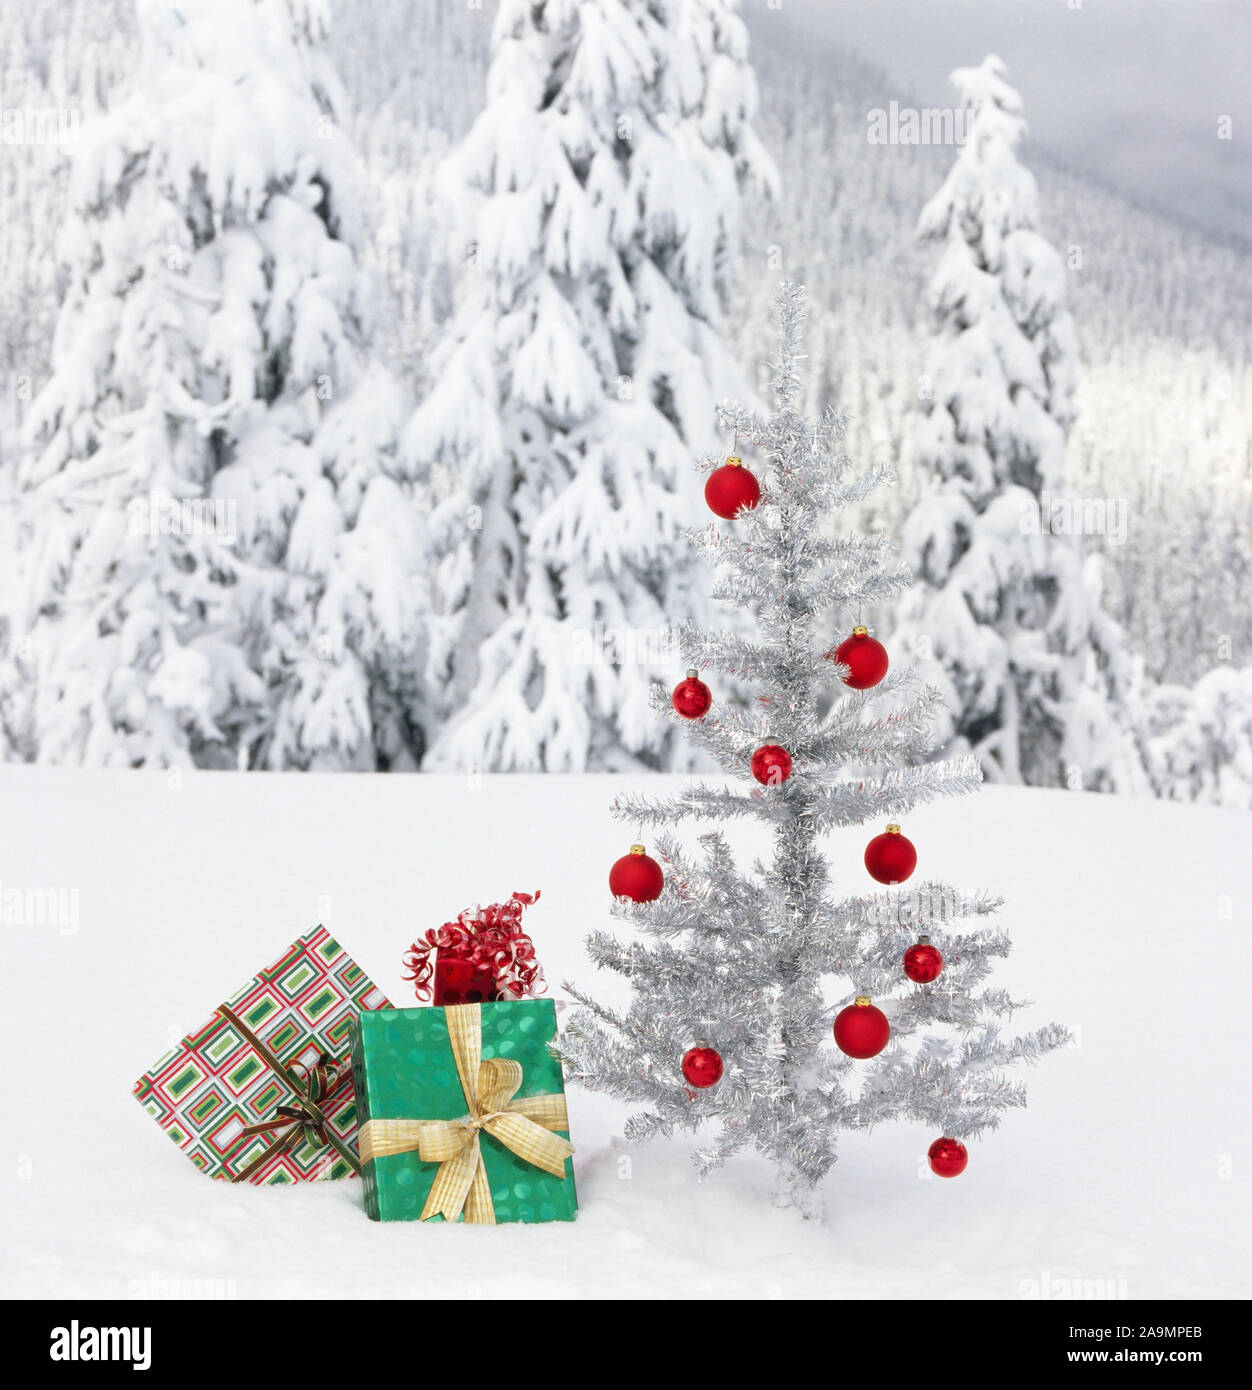 Christmas gifts under artificial tinsel tree outdoors with snowy mountain landscape background.  Actual photo shot in winter wilderness, not fake. Stock Photo